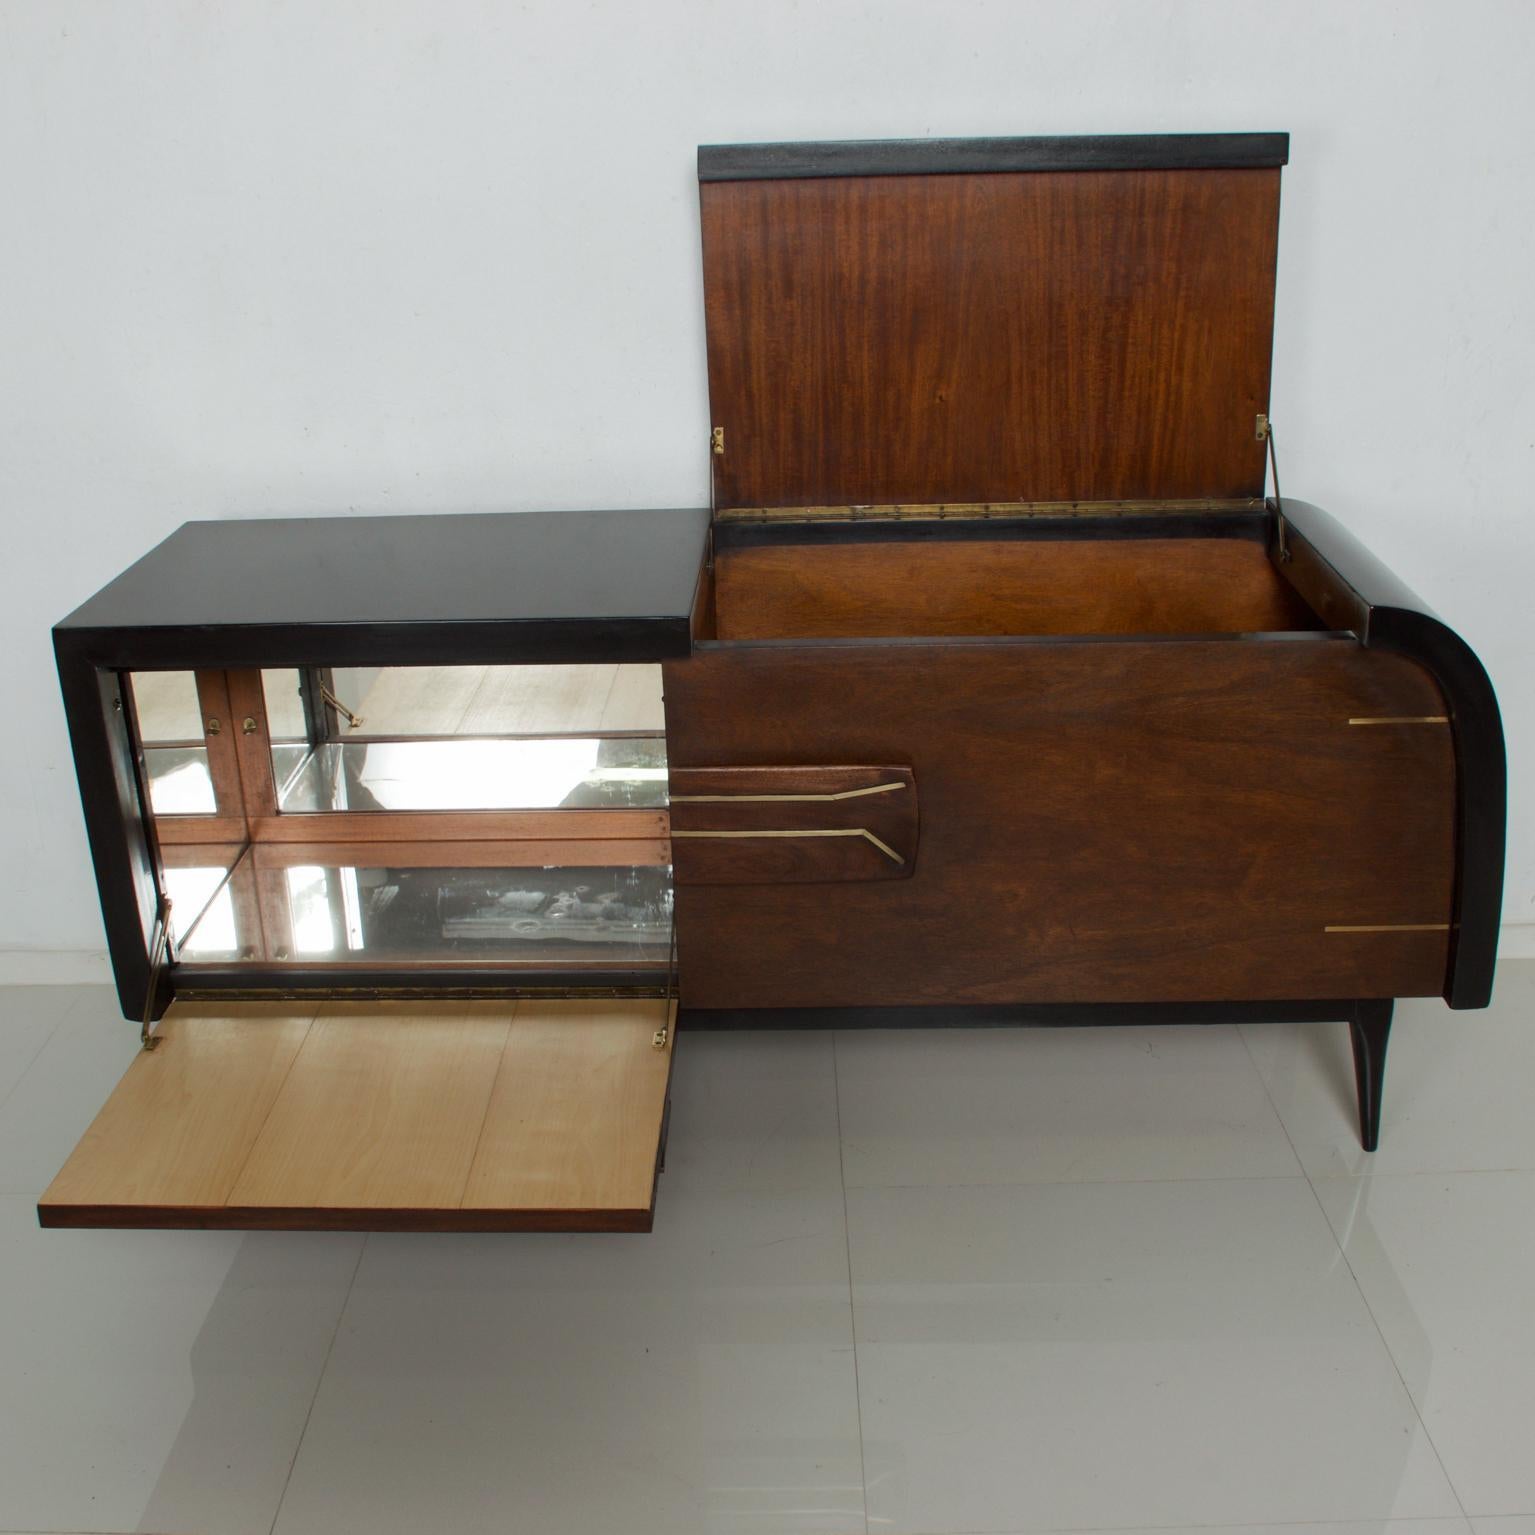 We are pleased to offer for your consideration, a Drybar designed by Frank Kyle. Made in Mexico, circa 1950s. Mahogany wood with bronze inserts. There are two storage sections. Clever and unique sculptural design. Dimensions: Cabinet 66 1/2